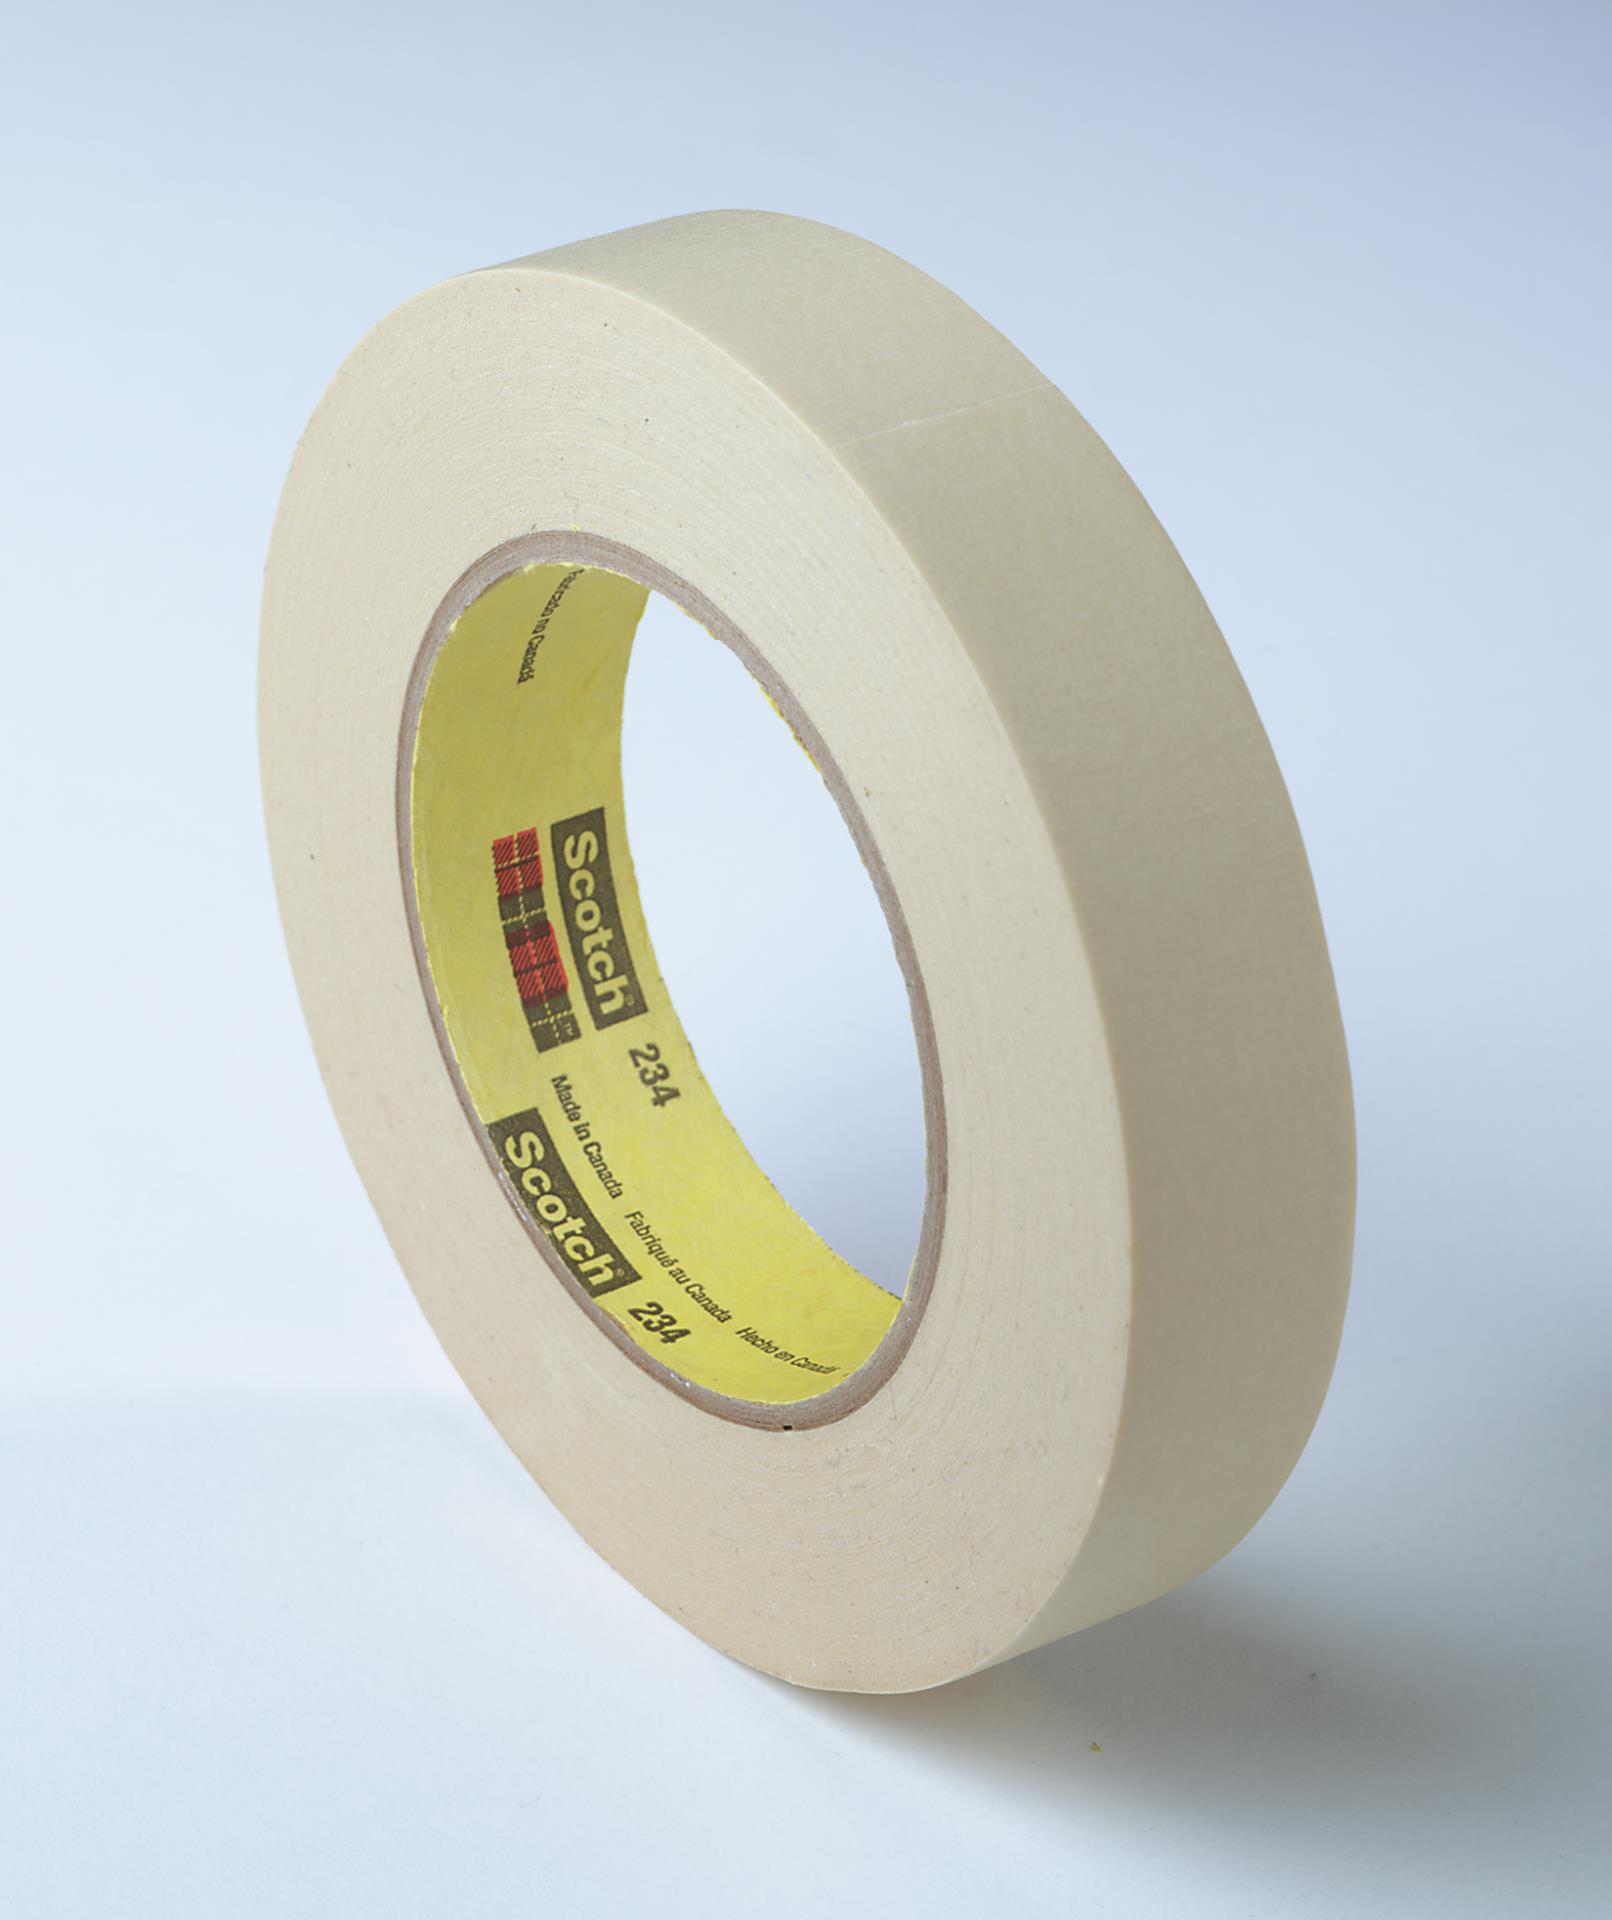 Each 1-1//2-In Lot of two 3M Indoor Carpet Tape x 42-Ft